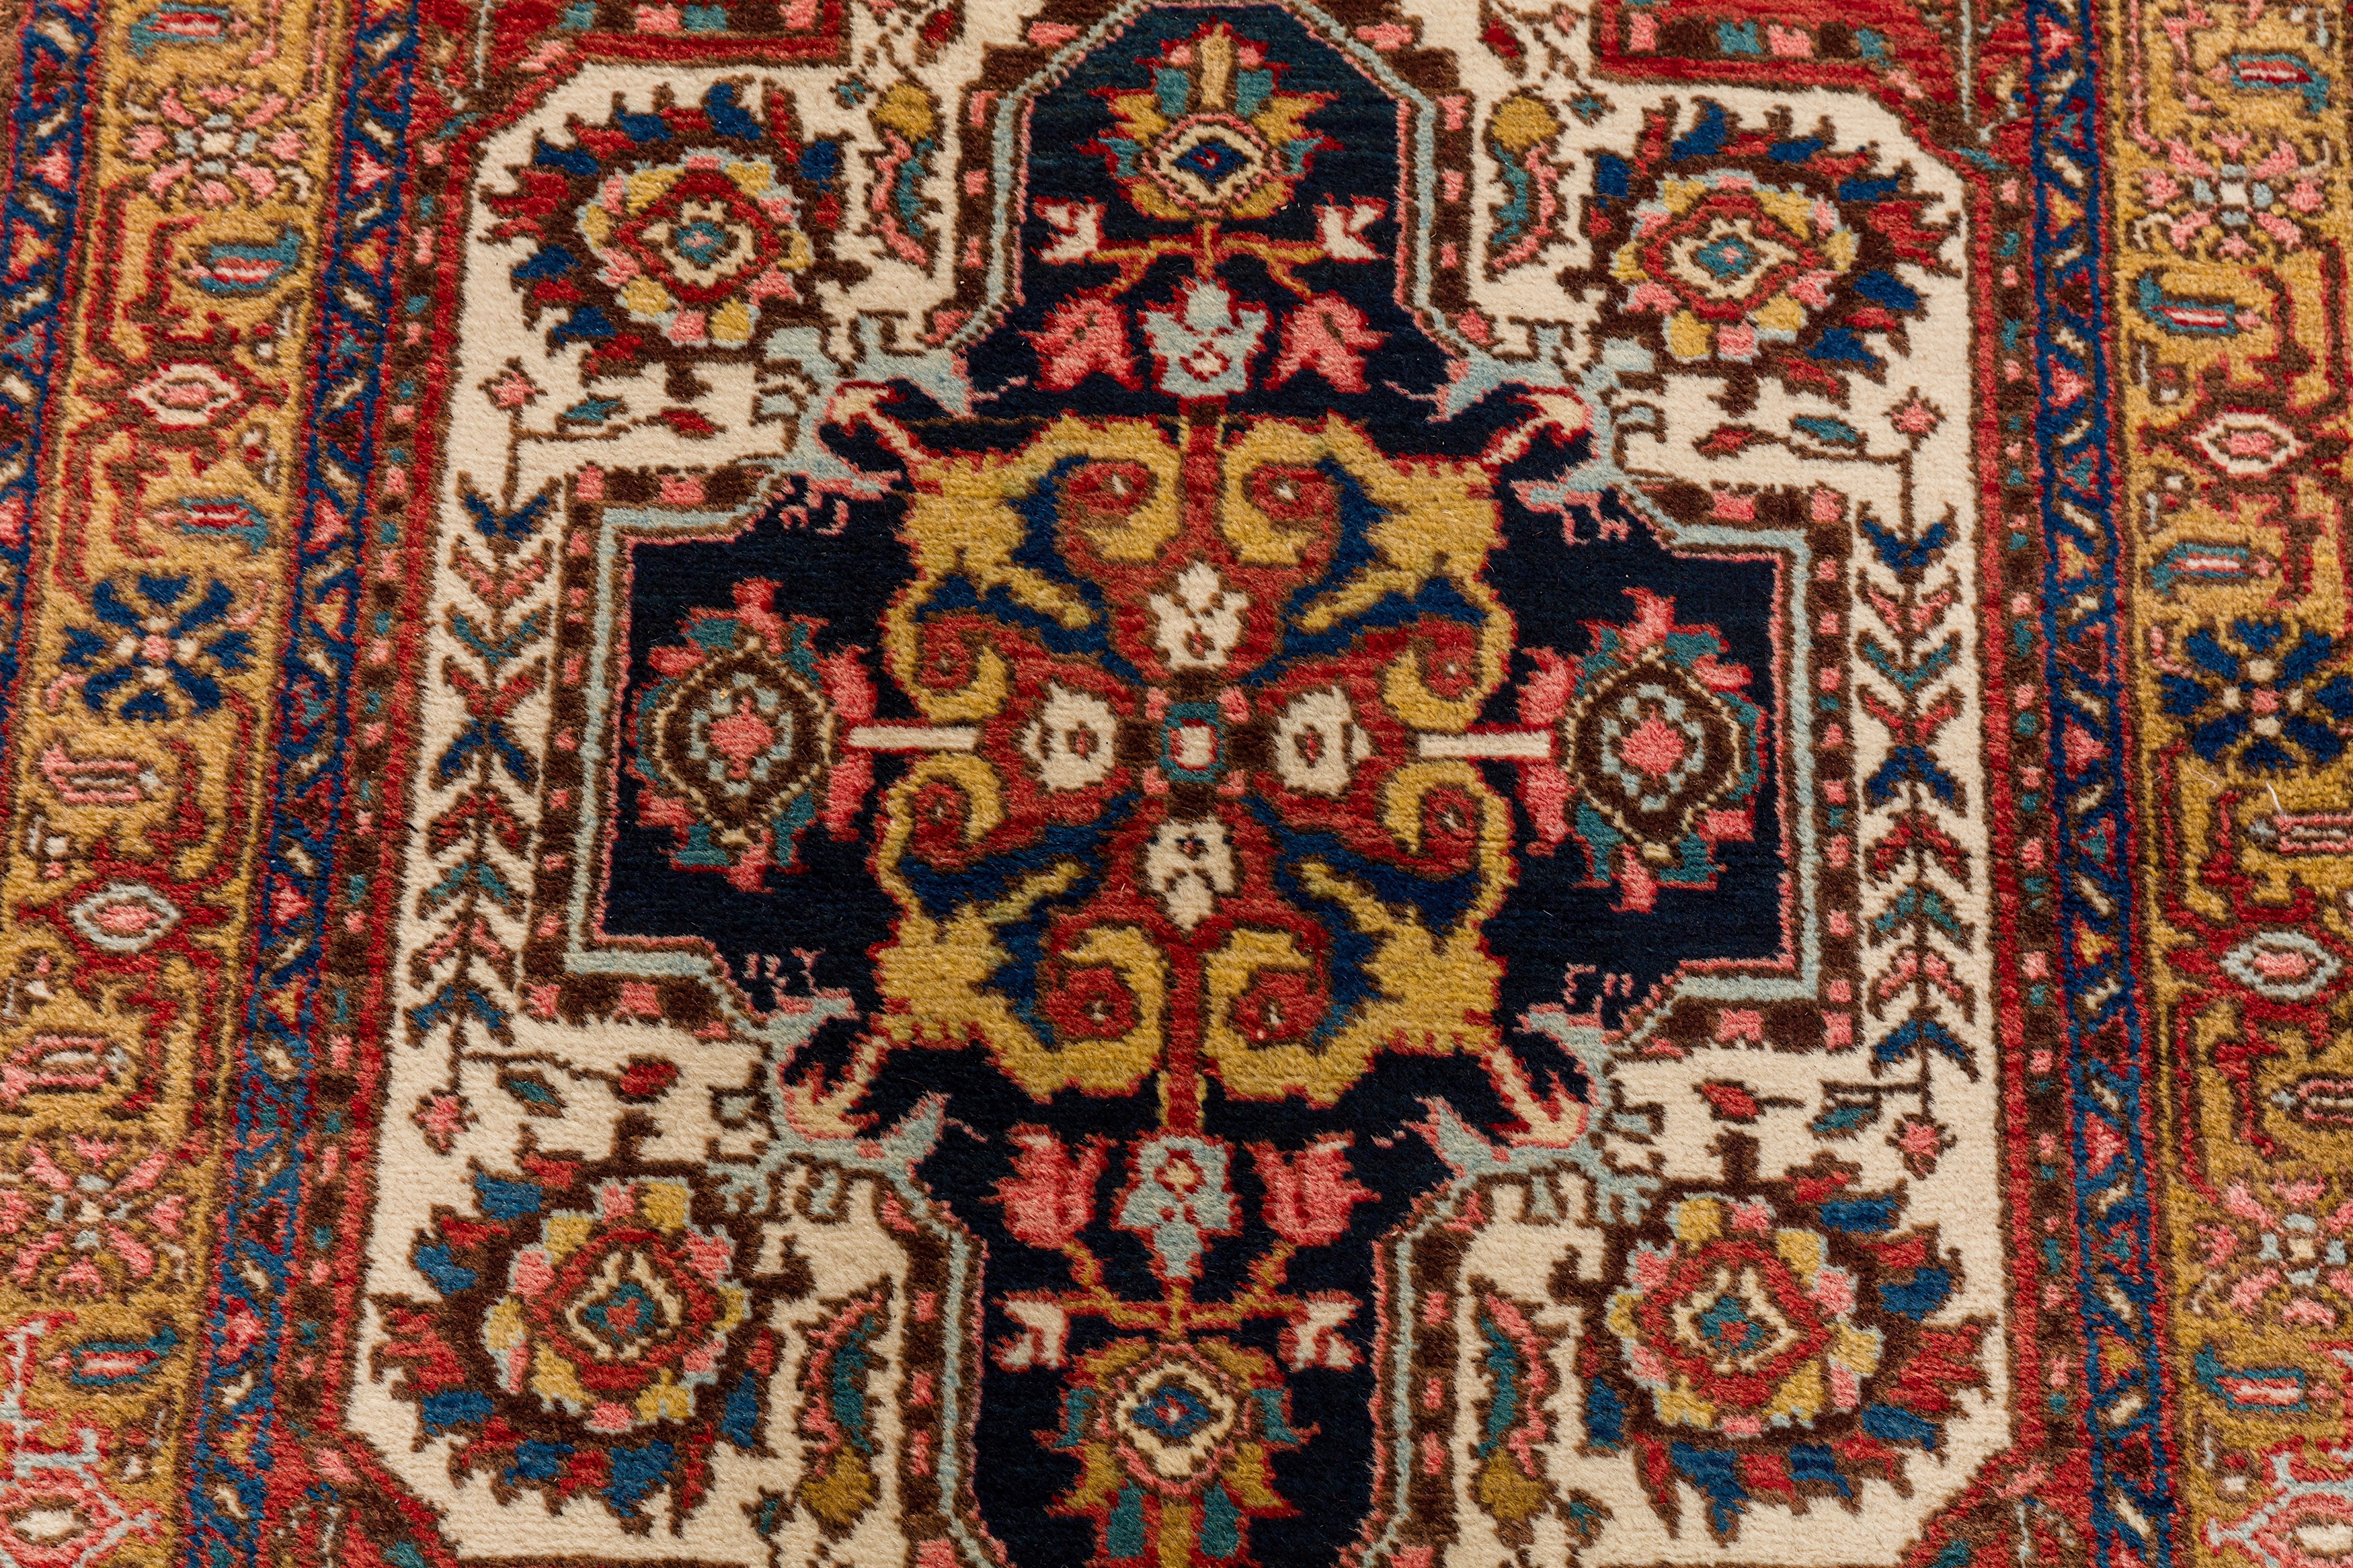 A FINE NORTH-WEST PERSIAN RUNNER - Image 4 of 9